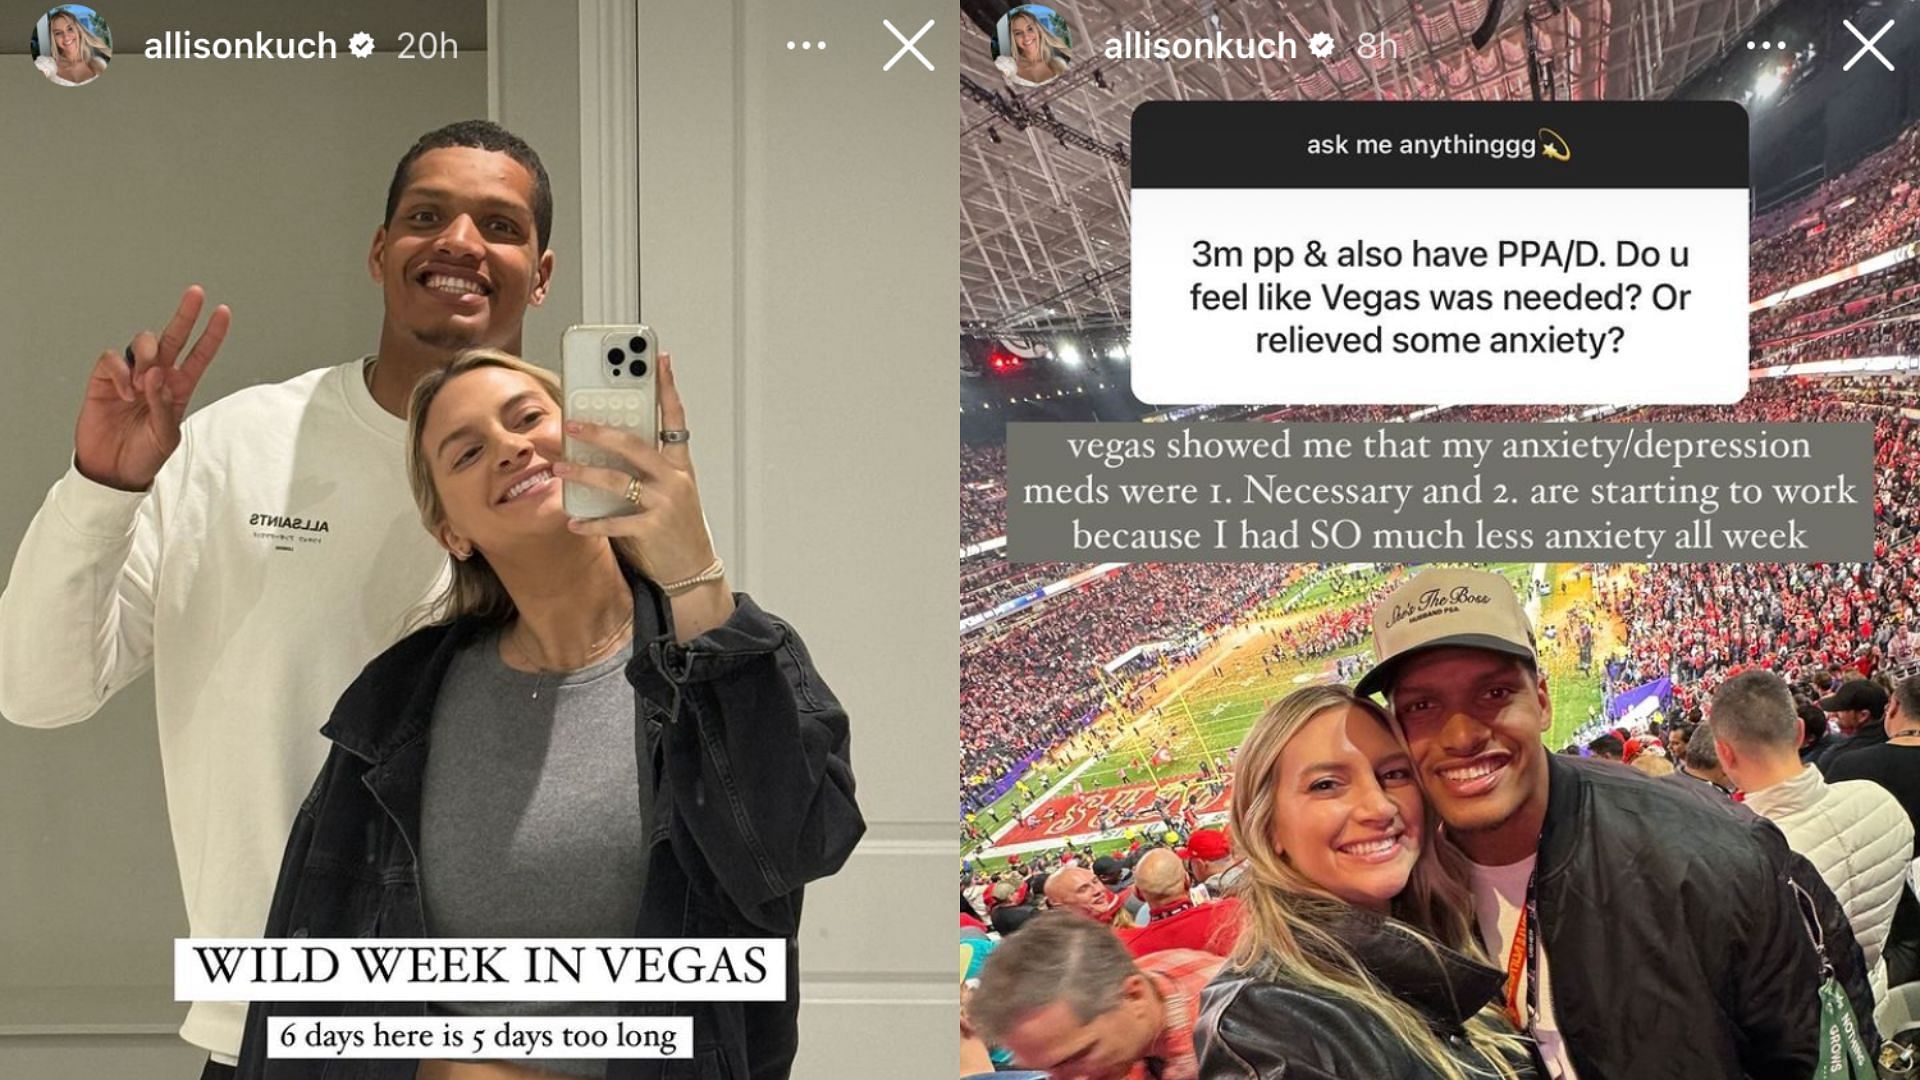 Allison Kuch opened up about her time in Las Vegas during the Super Bowl and how it affected her mental health.